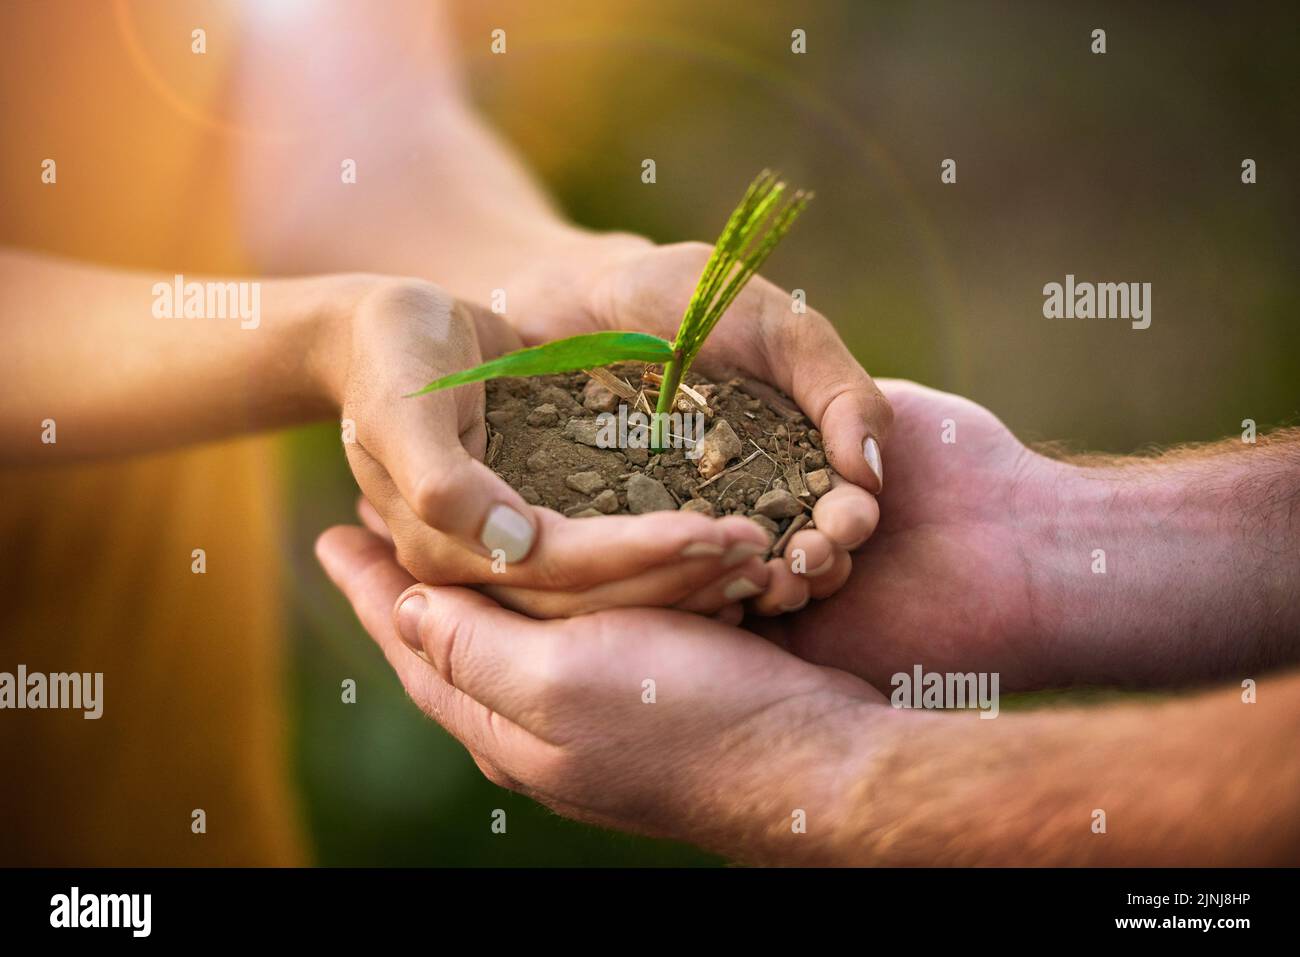 Caring people holding in hands a seed, plant and soil growth for environmental awareness conservation or sustainable development. Eco couple with Stock Photo